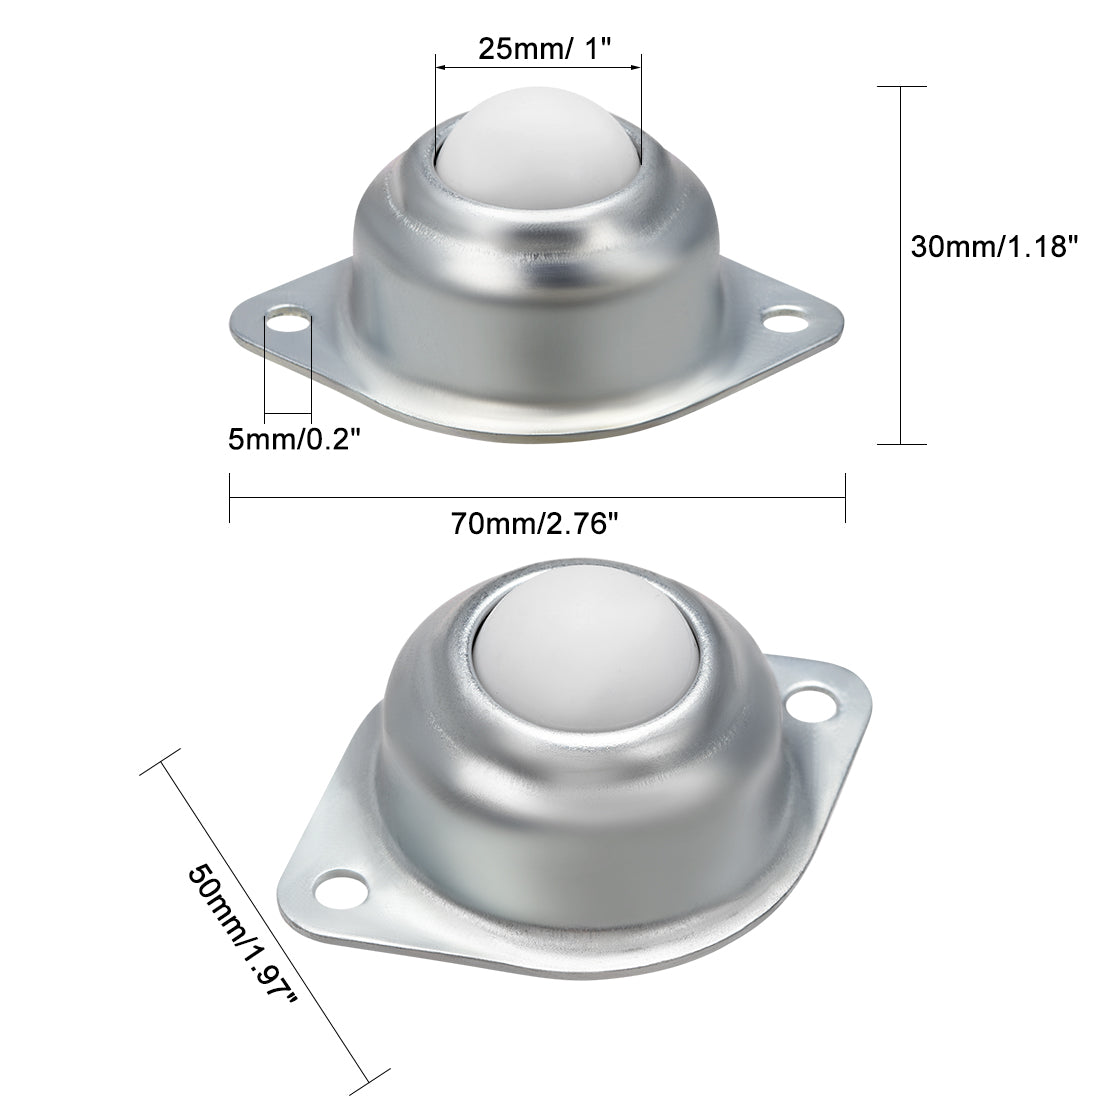 uxcell Uxcell Ball Transfer Units CY-25A Flange Mounted 1 inch Nylon Roller Ball Transfer Bearing Casters 66lb Capacity